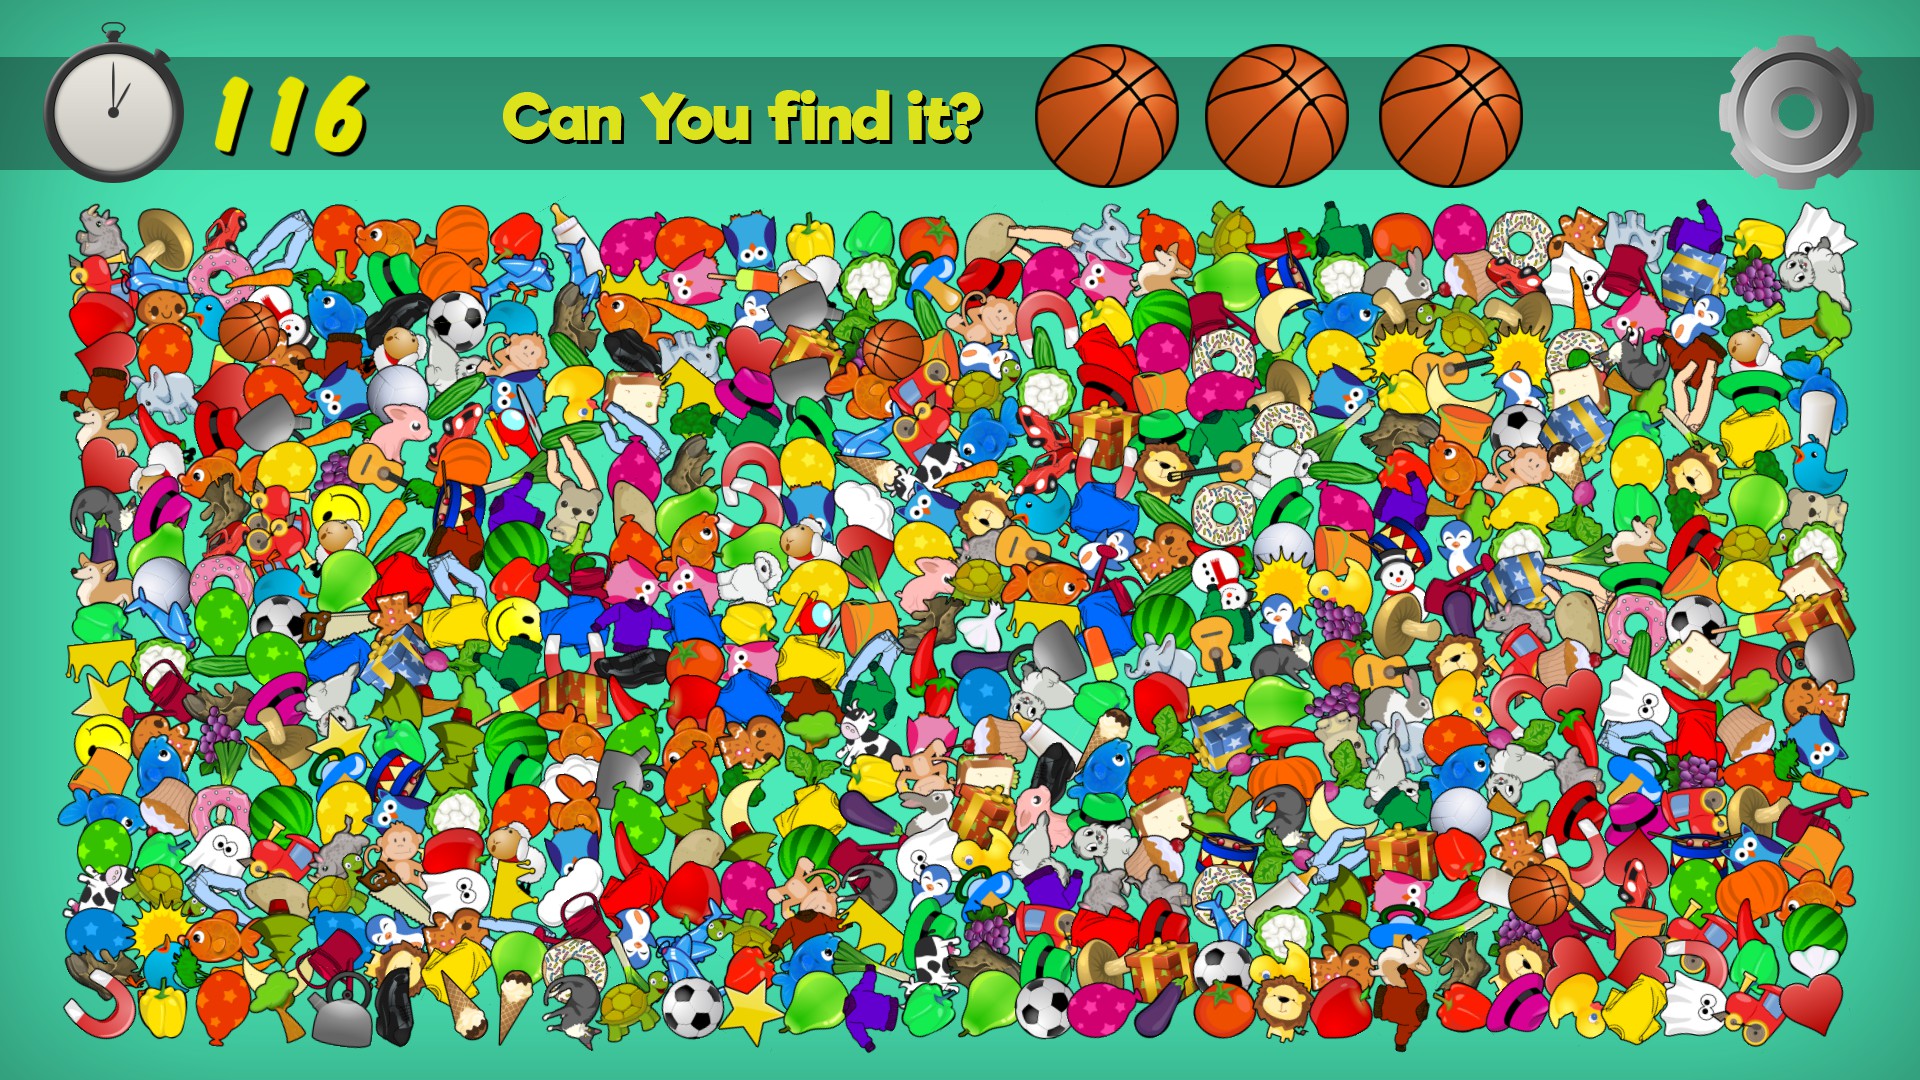 Games can he play. Игра find. Can you find. Игра can you. Found it игра.